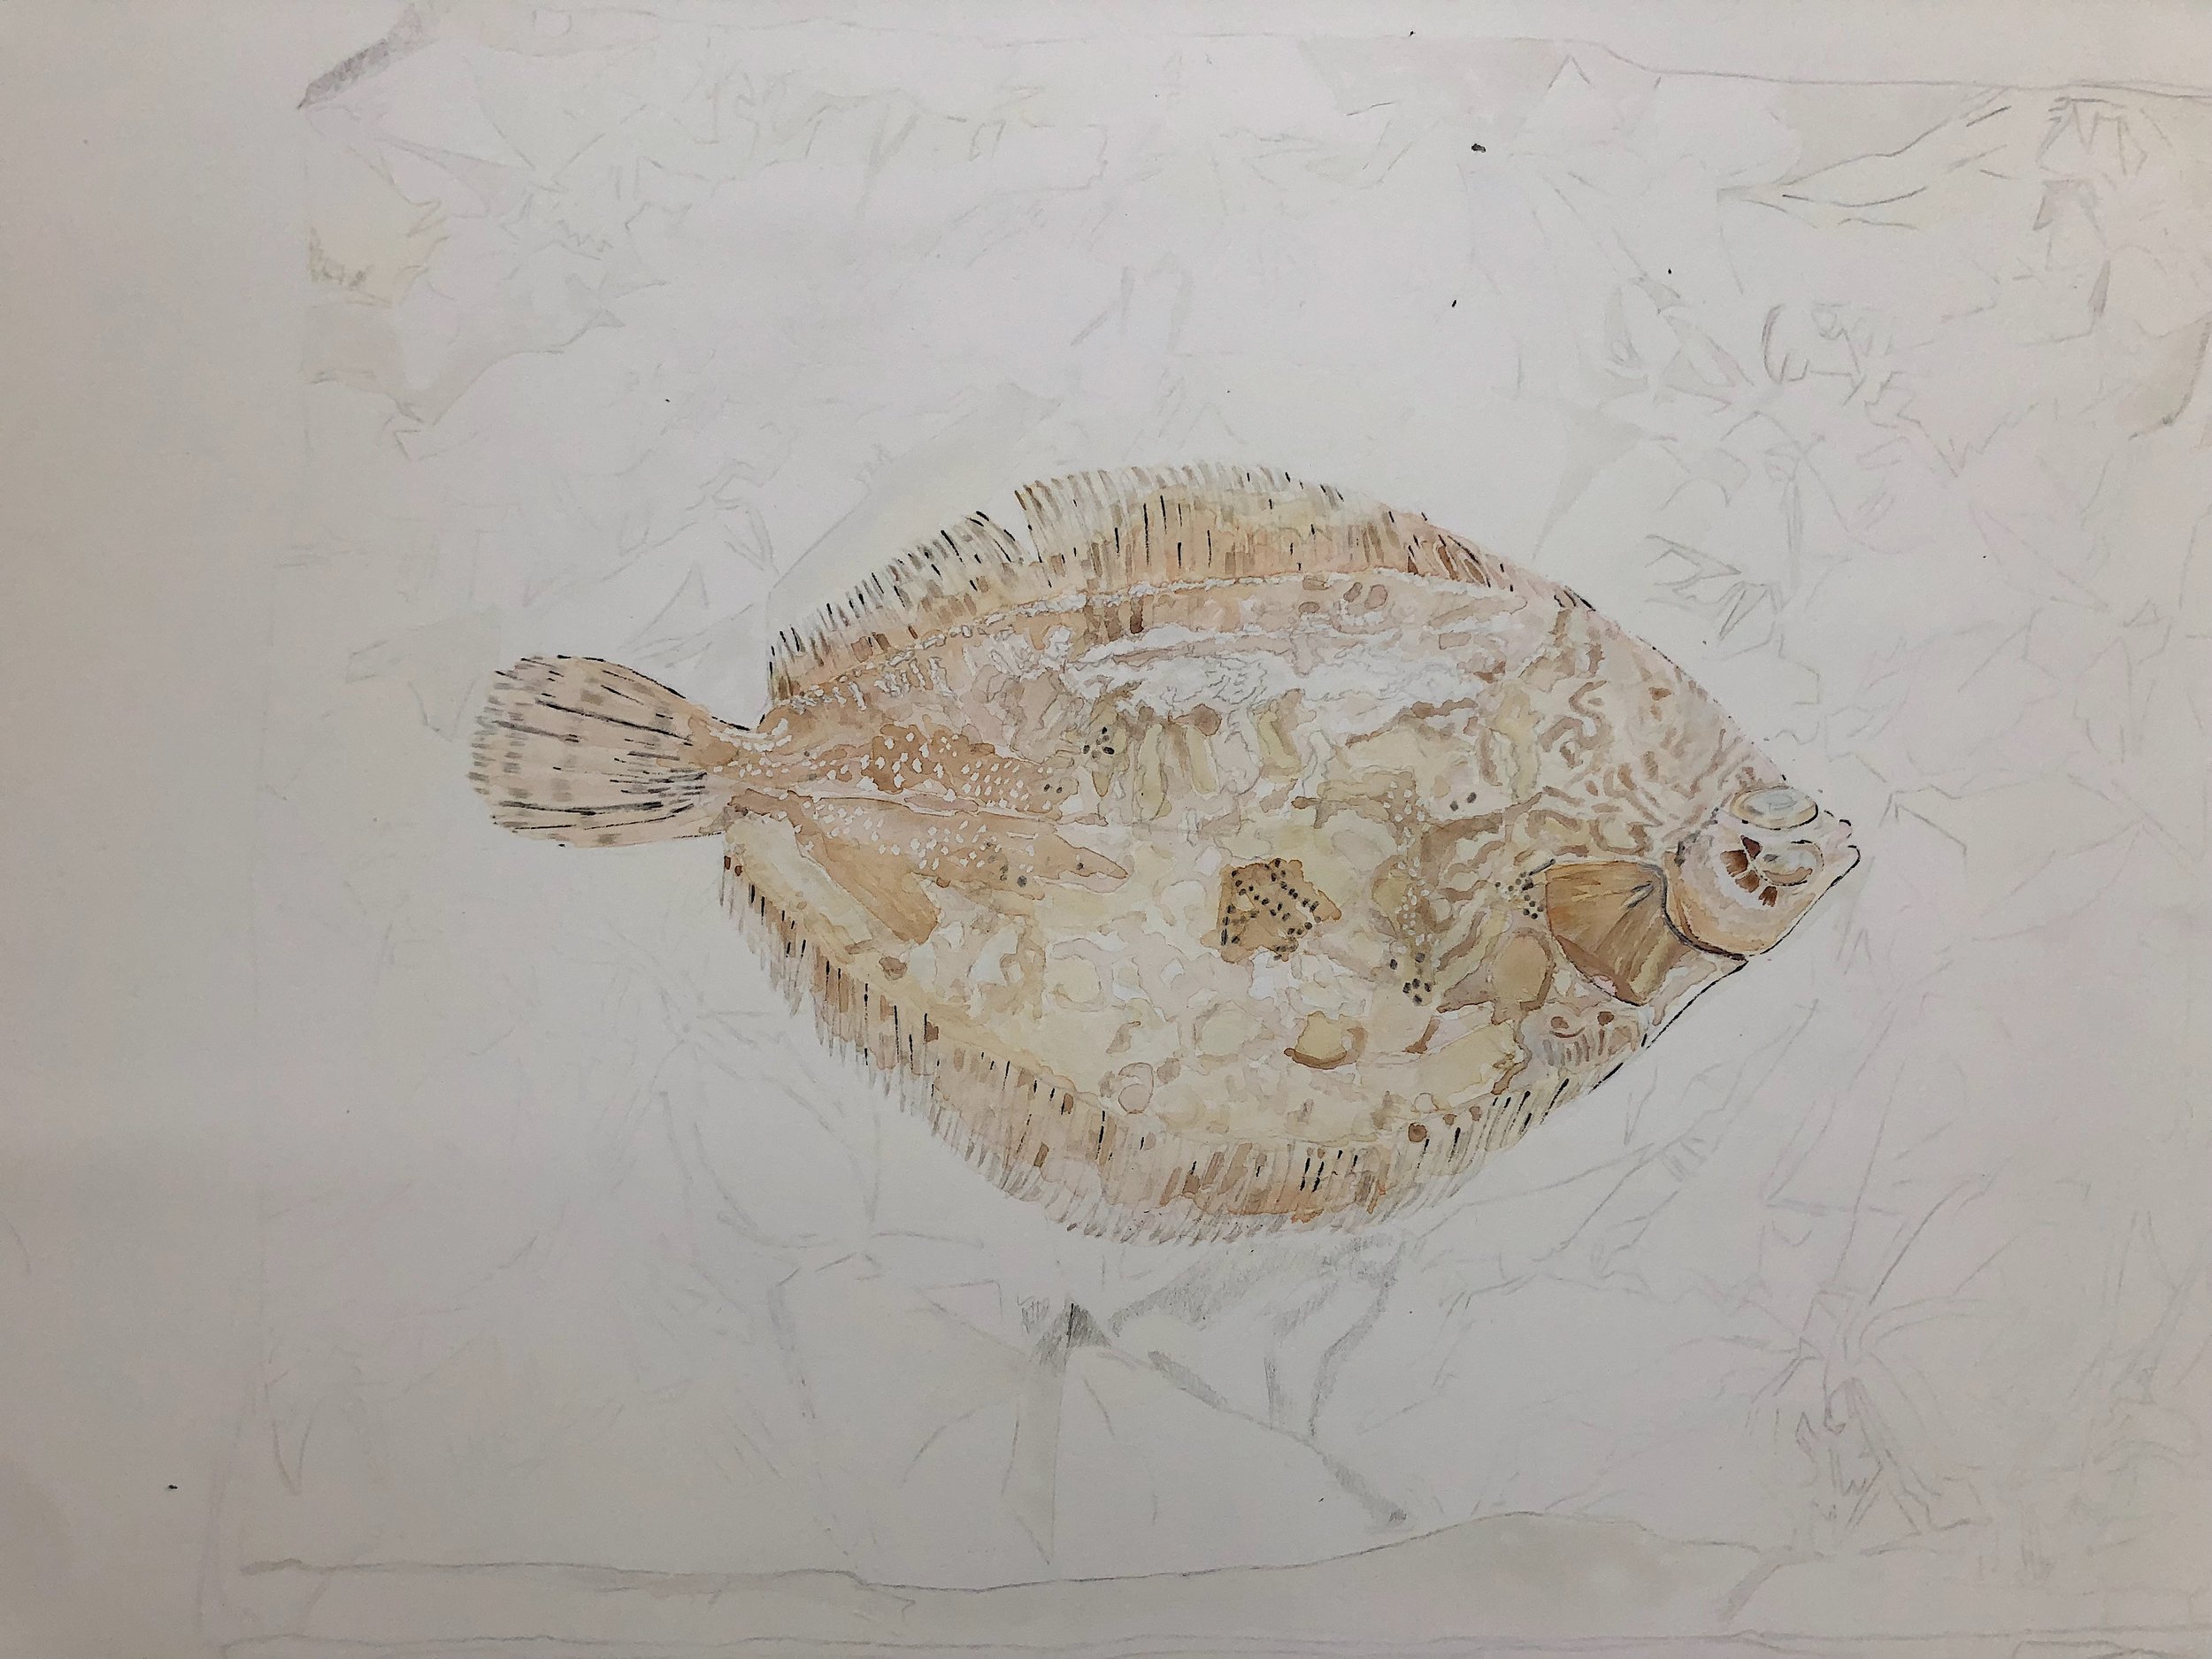 4-Lemon-Sole-Painting-Gone-Wrong-Lucy-Clayton-Art-Journal-Blog.jpeg